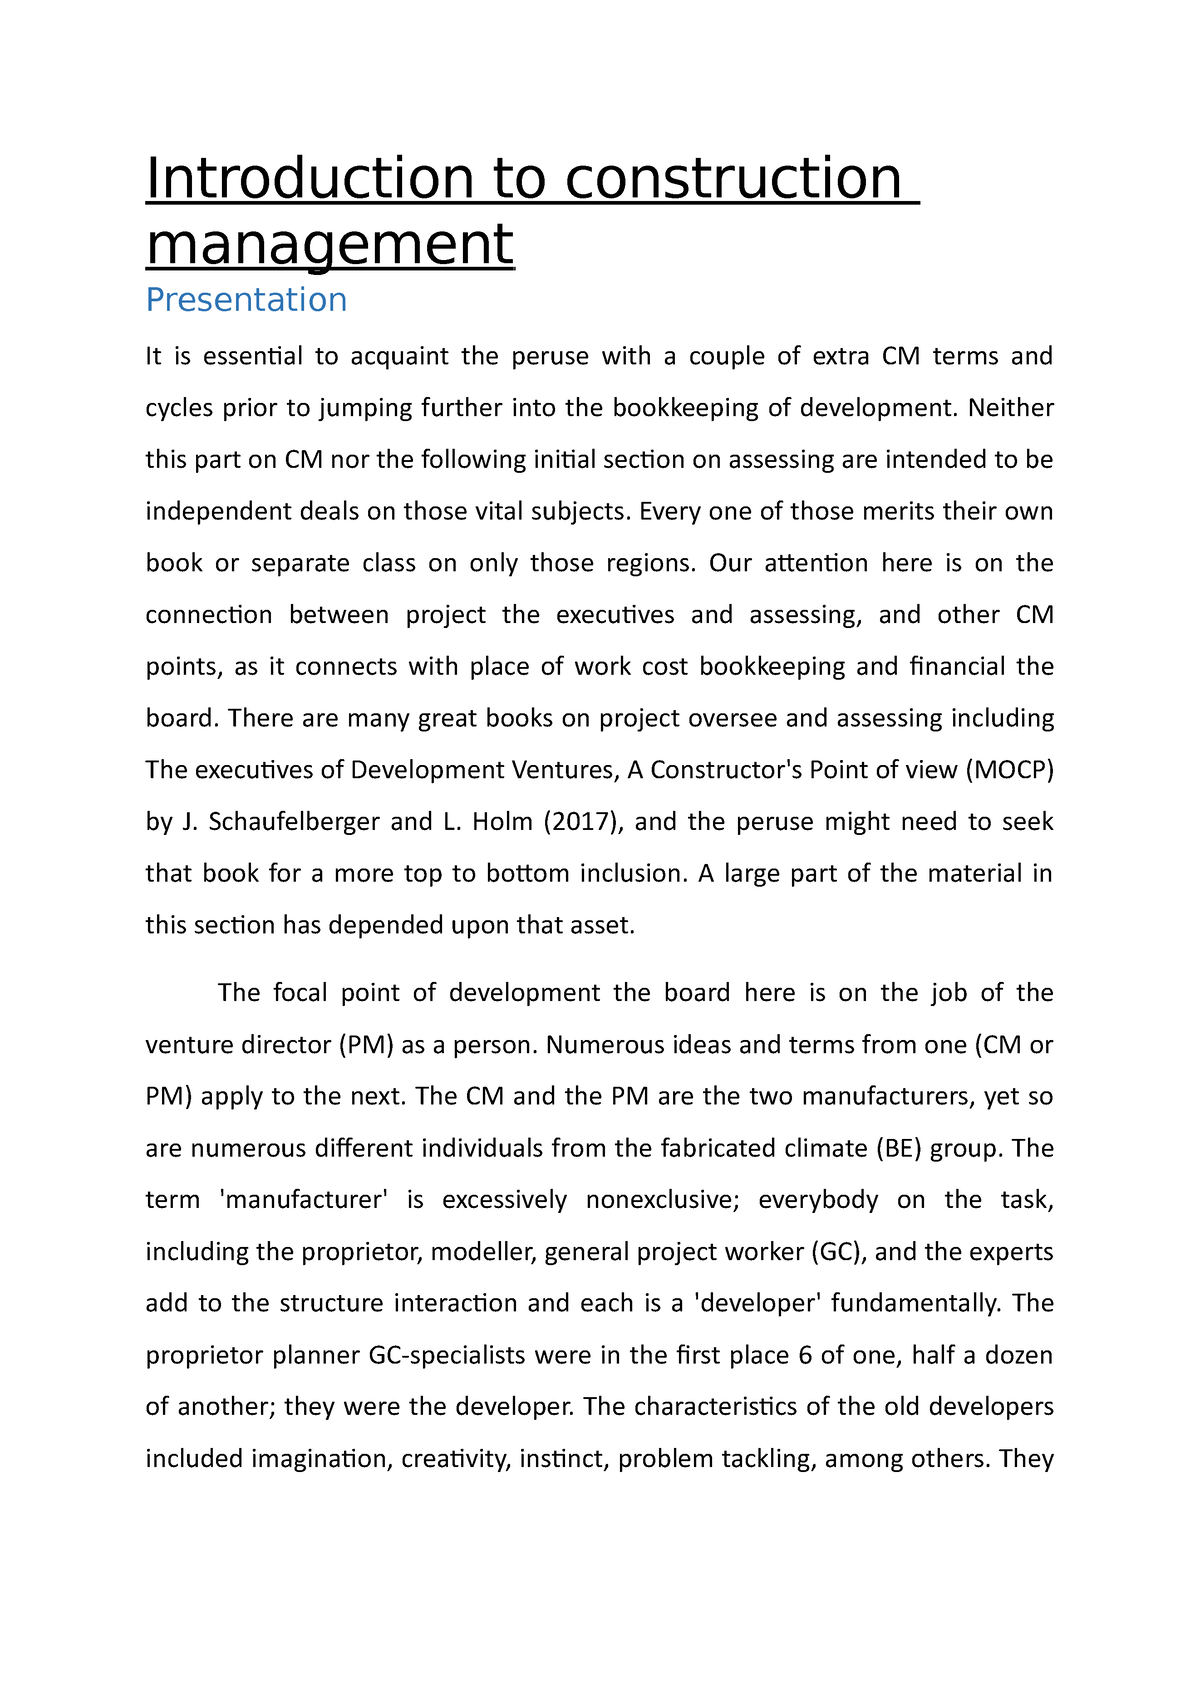 thesis on construction management